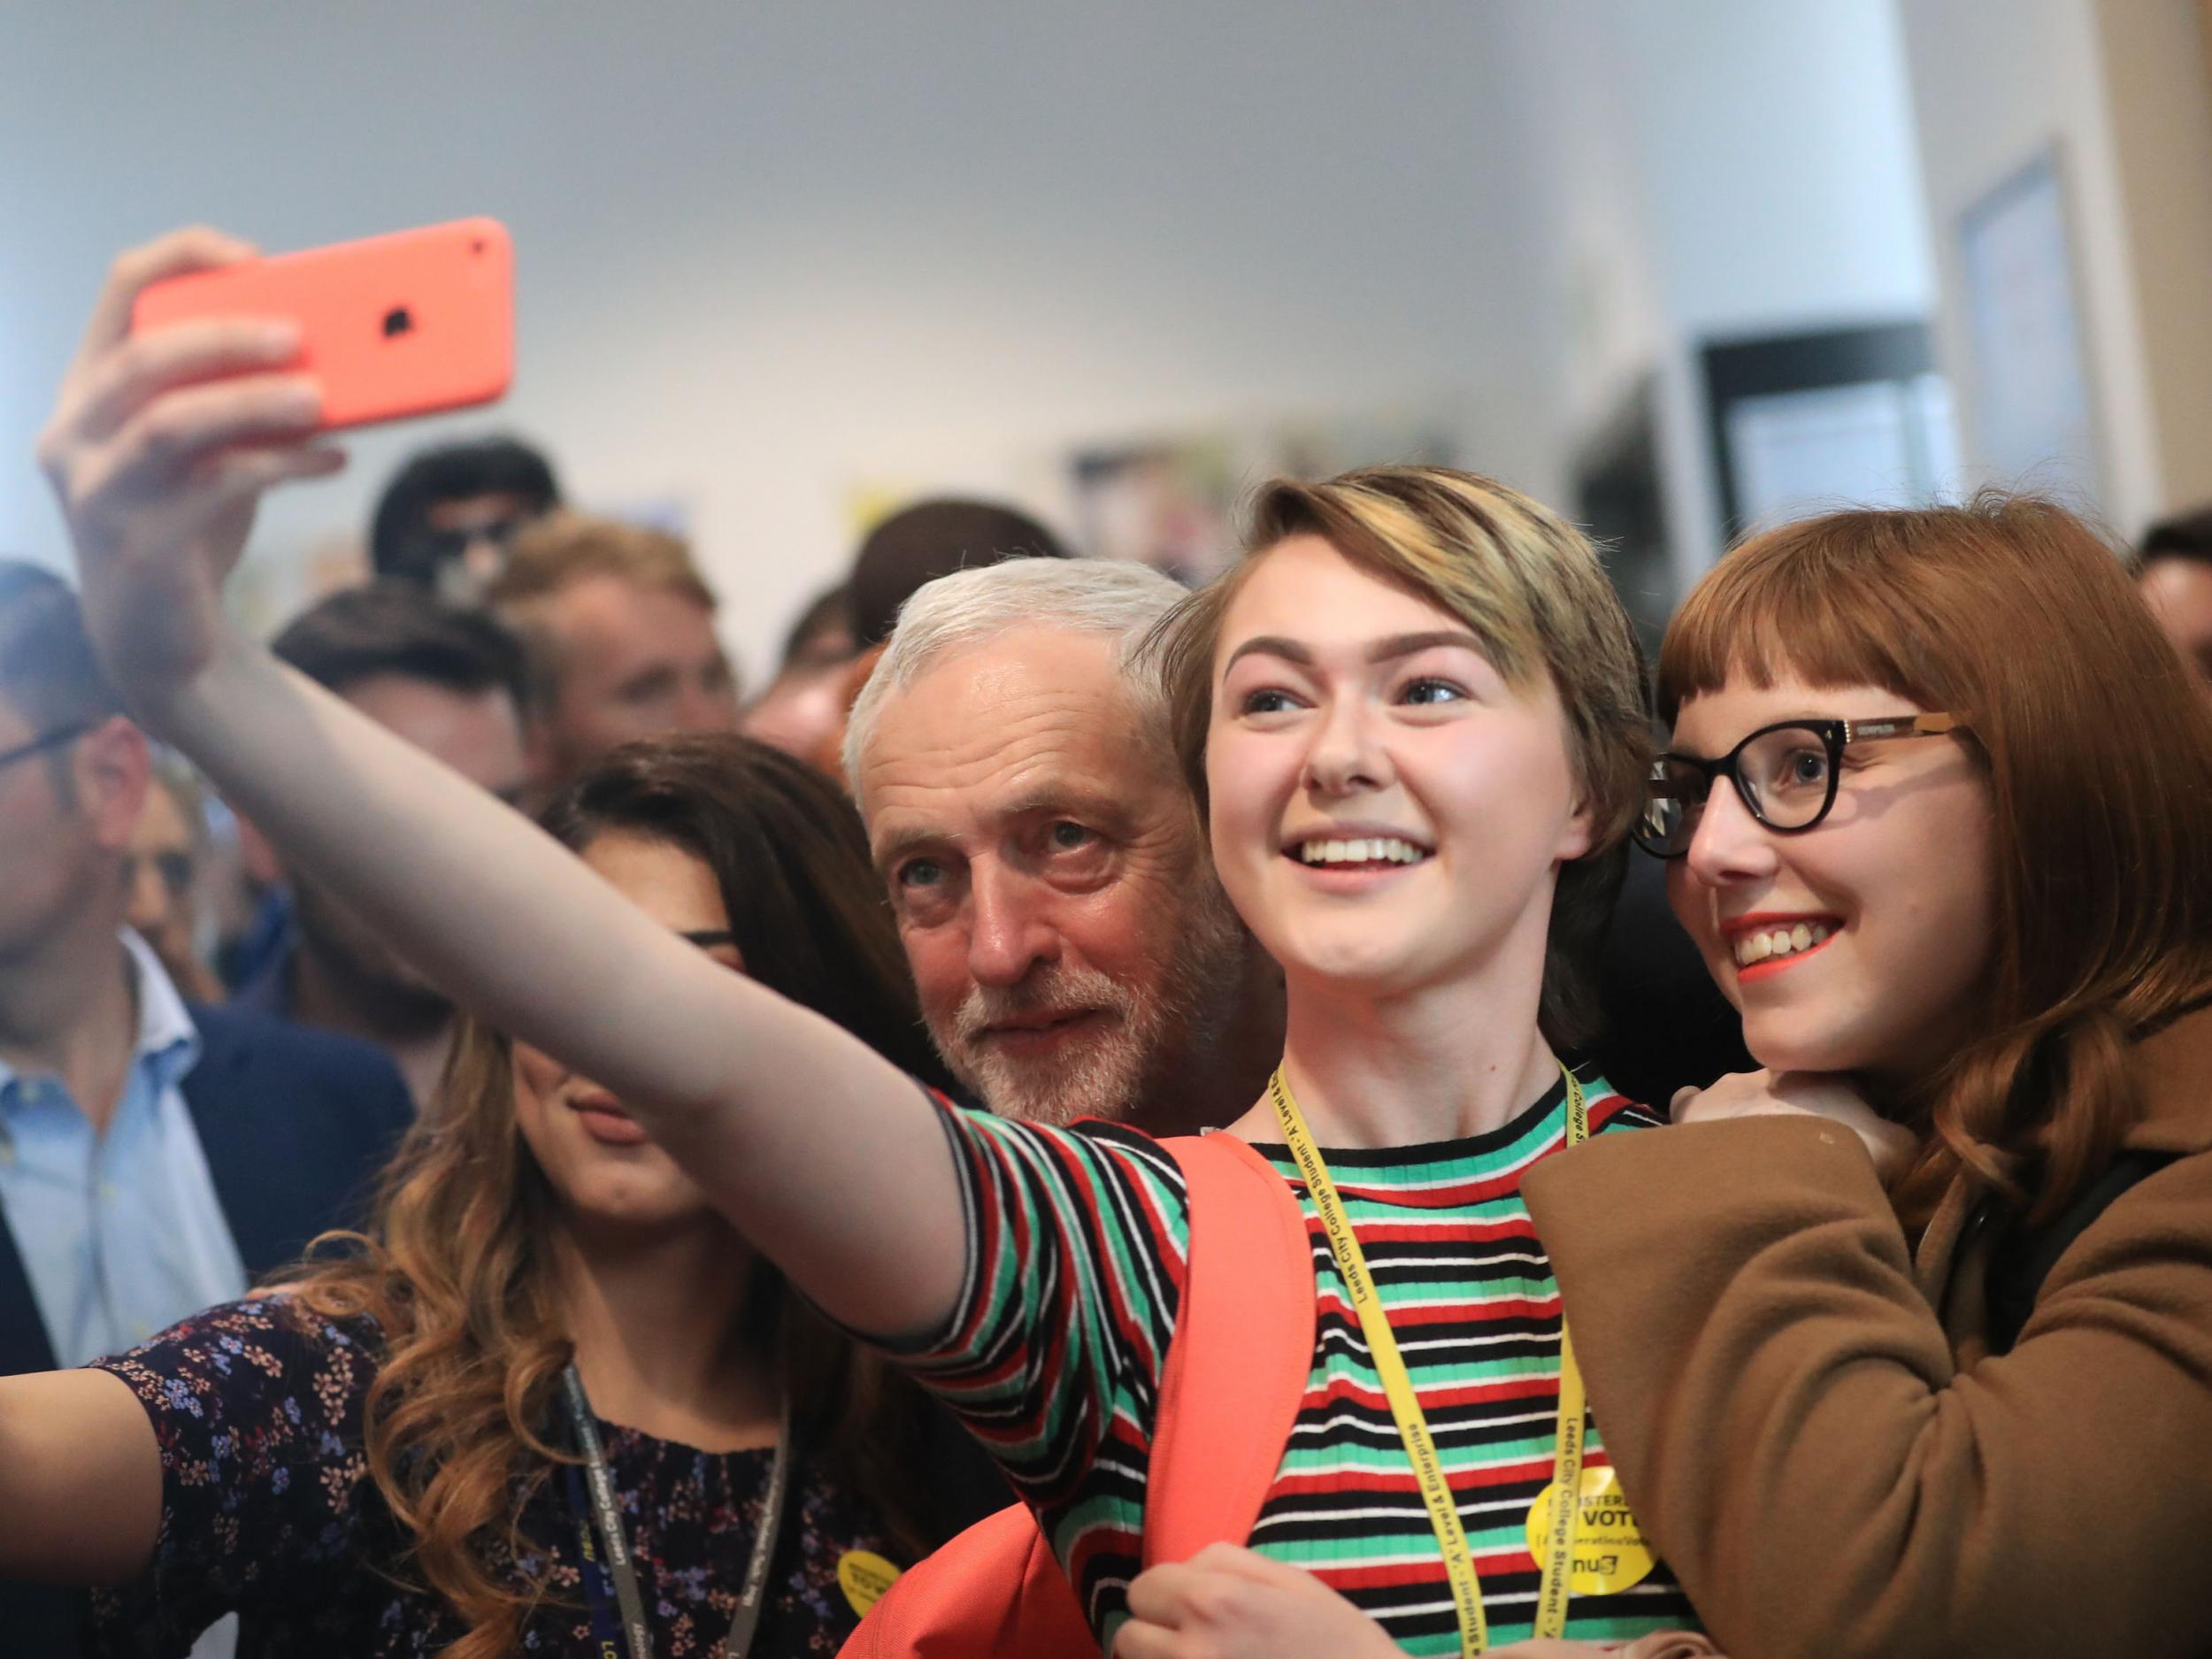 Labour leader Jeremy Corbyn is proving more adept at engaging with younger people in person and online, according to the findings